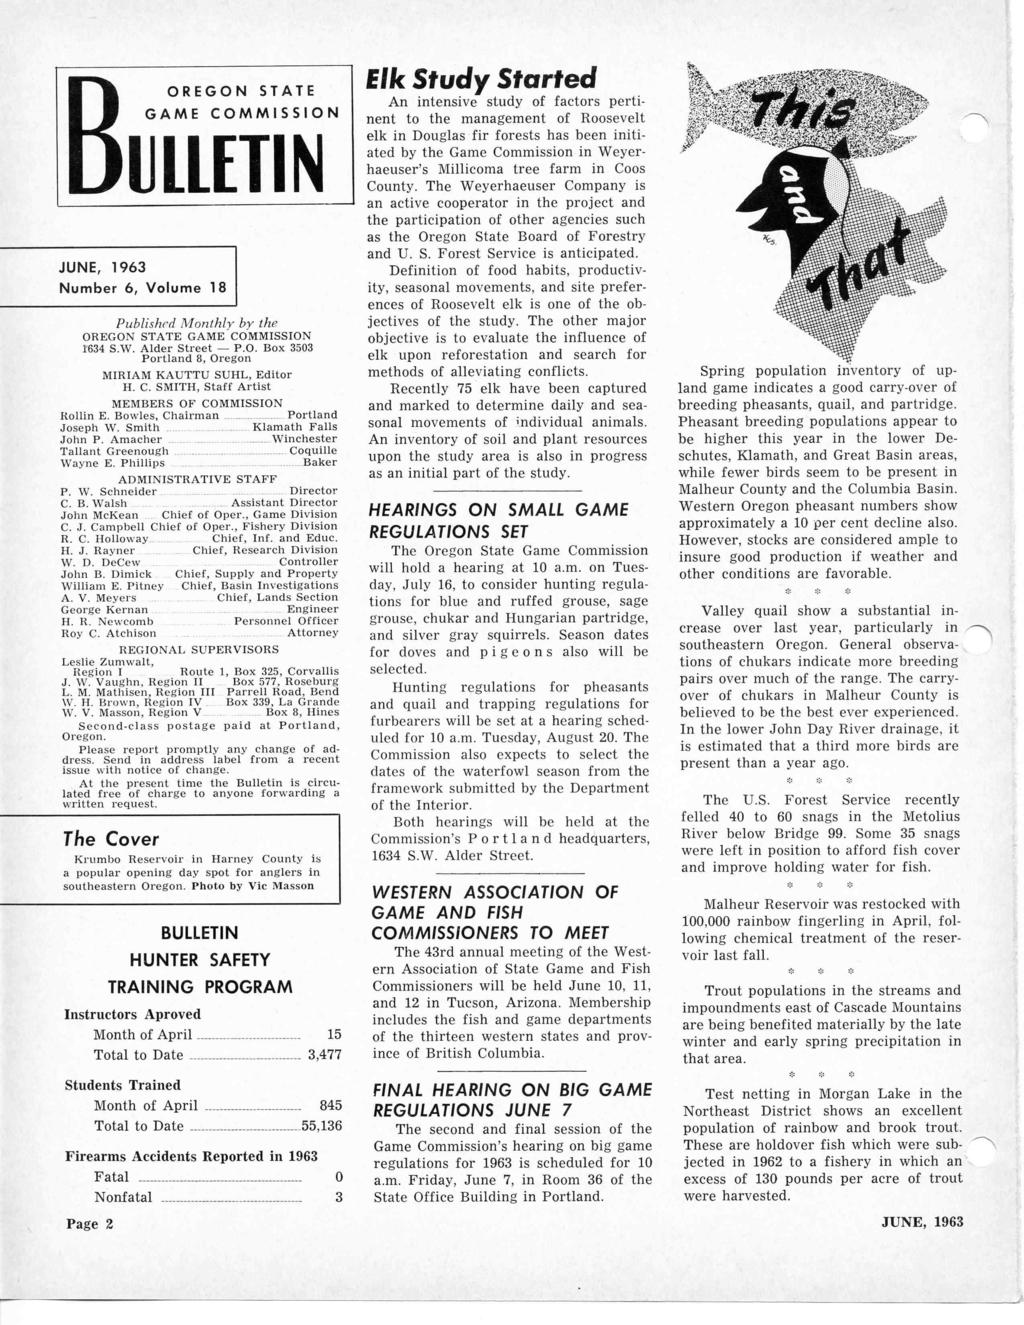 BOREGON STATE GAME COMMISSION ULLETIN JUNE, 1963 Number 6, Volume 18 Published Monthly by the OREGON STATE GAME COMMISSION 2634 S.W. Alder Street P.O. Box 3503 Portland 8, Oregon MIRIAM KAUTTU SUHL, Editor H.